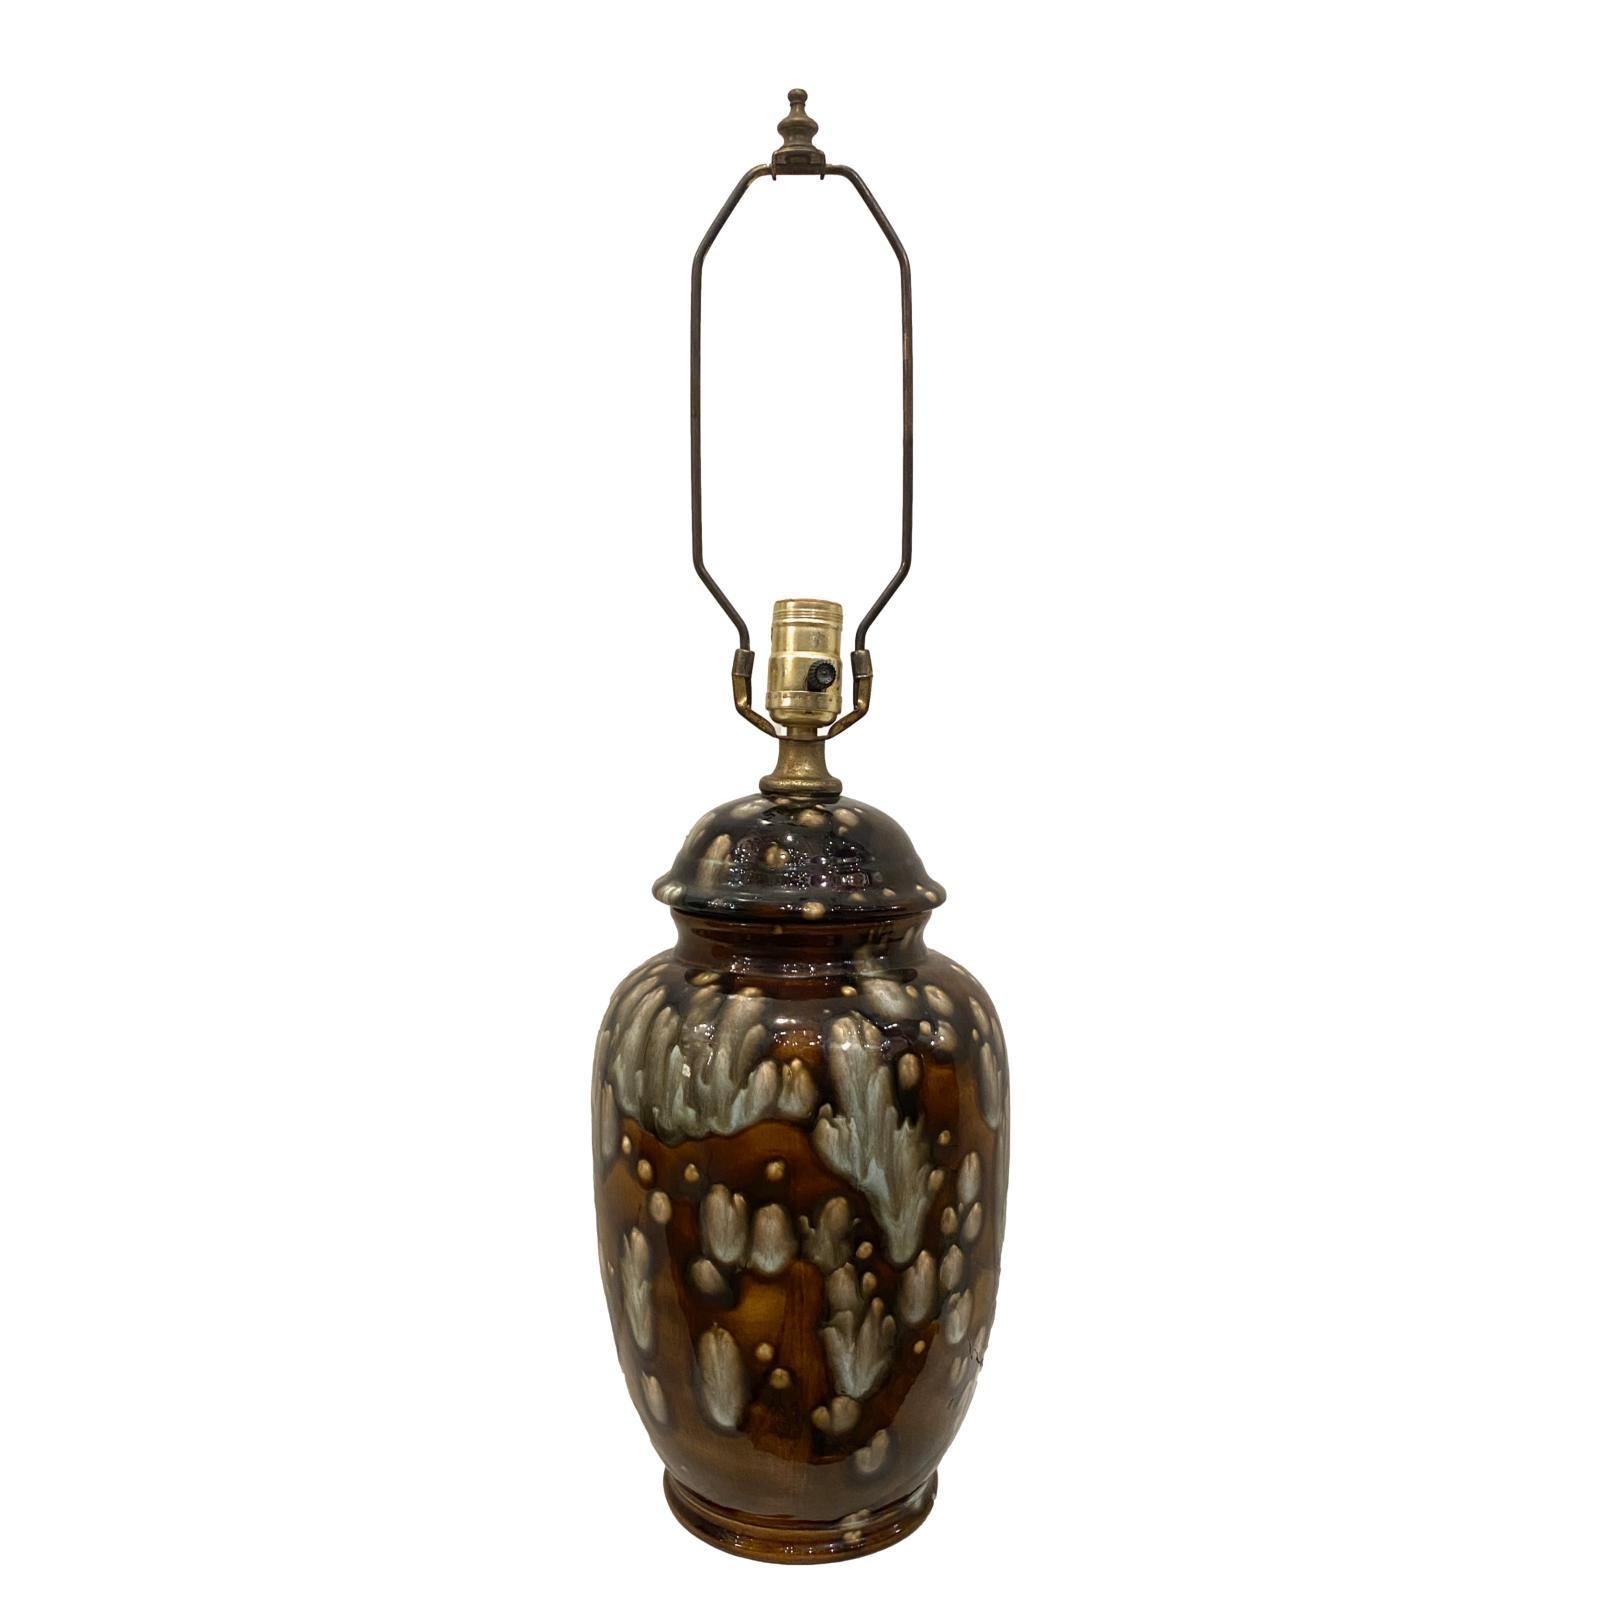 A single Italian circa 1950's drip-glazed ceramic table lamp in brown with white tones.

Measurements:
Height of body: 14